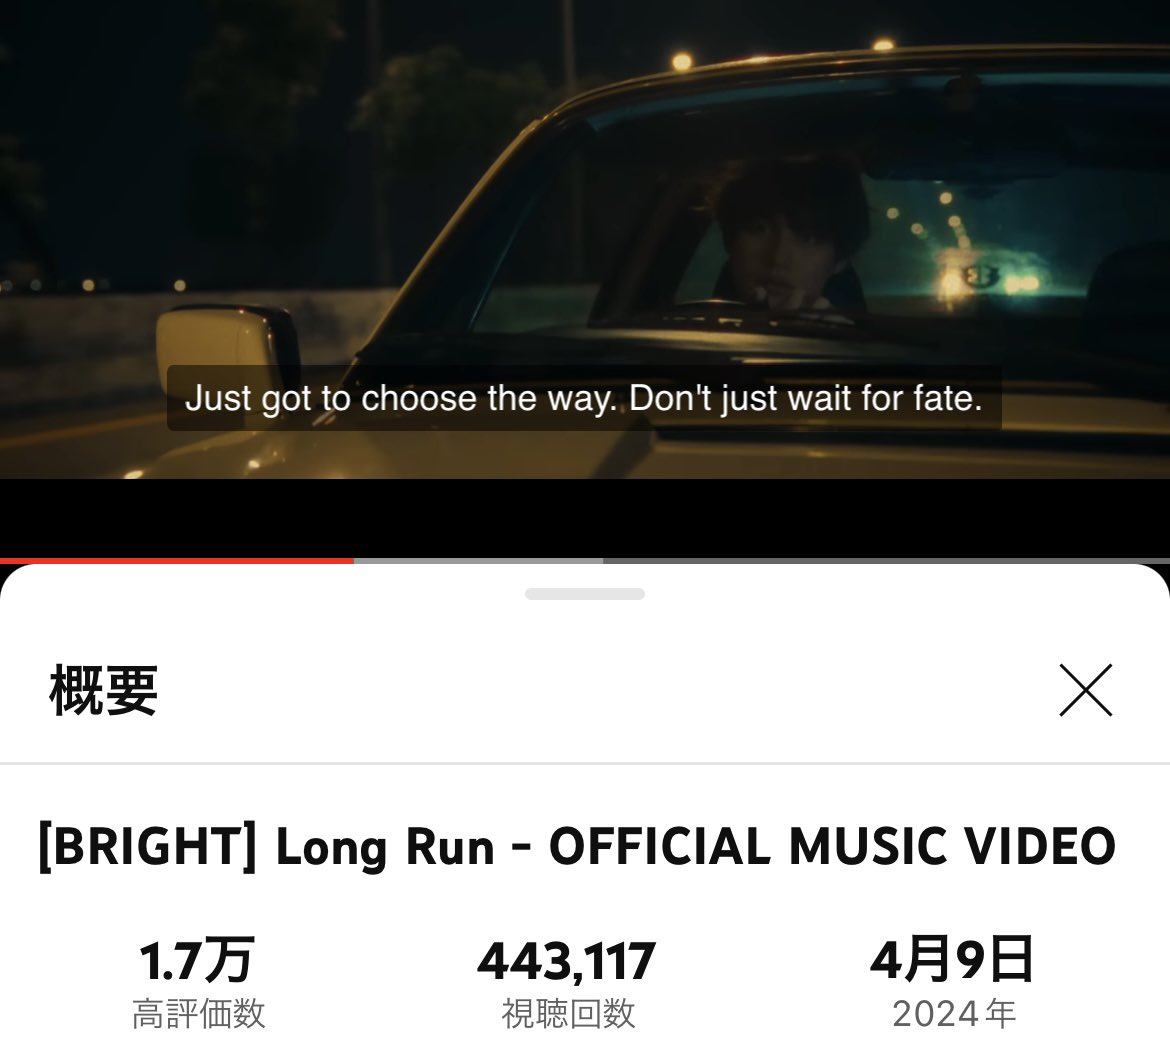 Go to 450K views 💨

'แค่ได้เลือกทาง อย่ามัวแต่รอชะตา'
This phrase catches my heart and I feel it expresses Bright so far and right now in his situation. Keep going 👍🏻

#LongRunMV 
#BRIGHT_LongRun 
#bbrightvc @bbrightvc